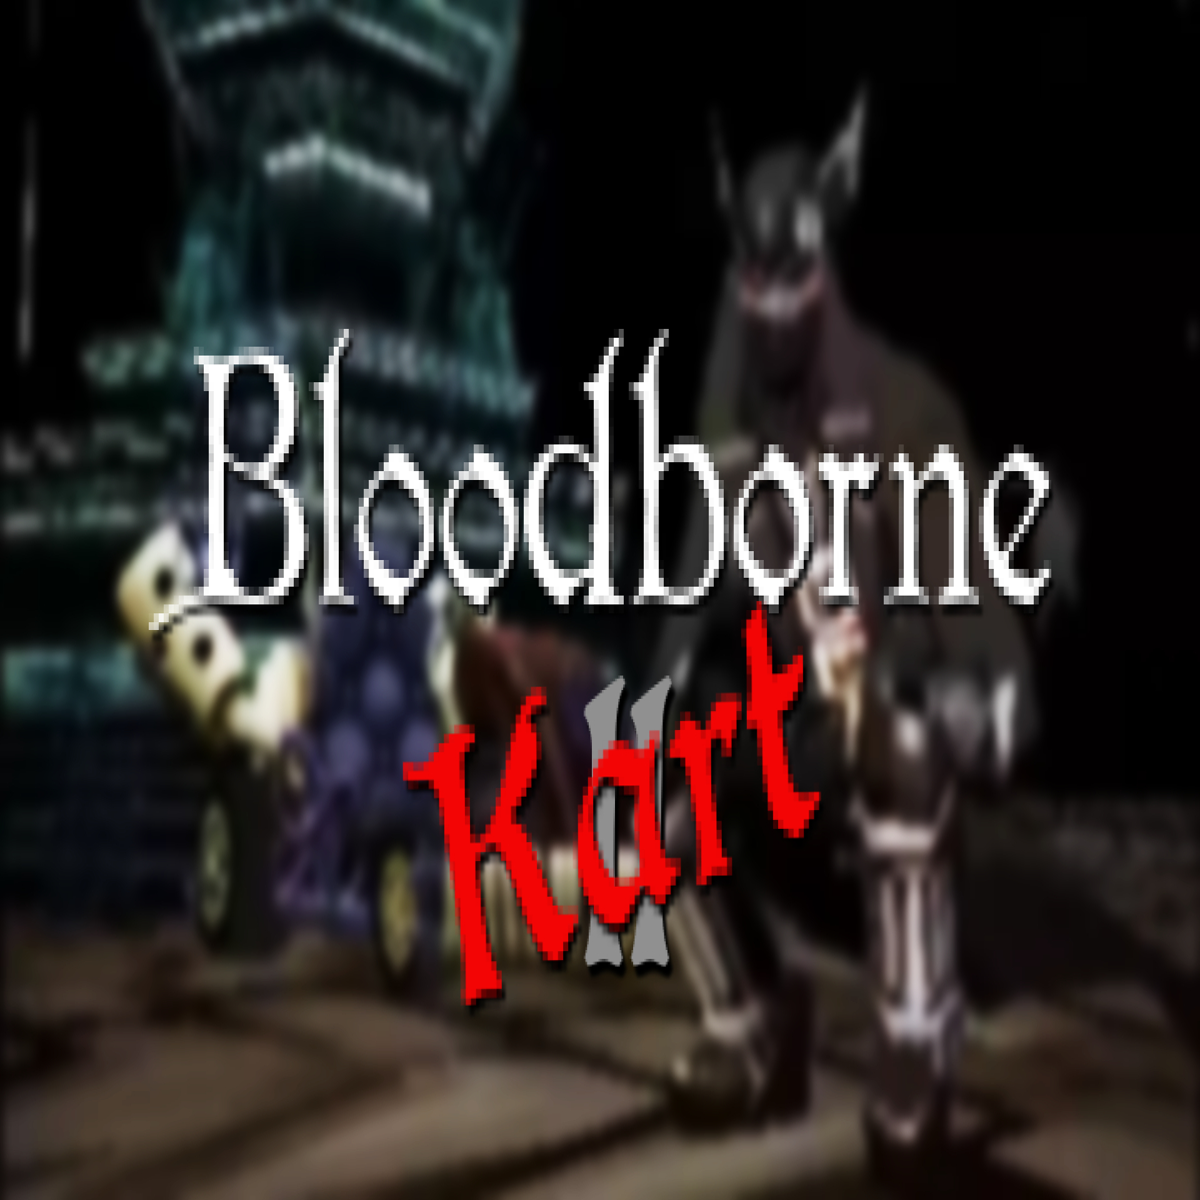 Bloodborne's being remade as a PS1 game